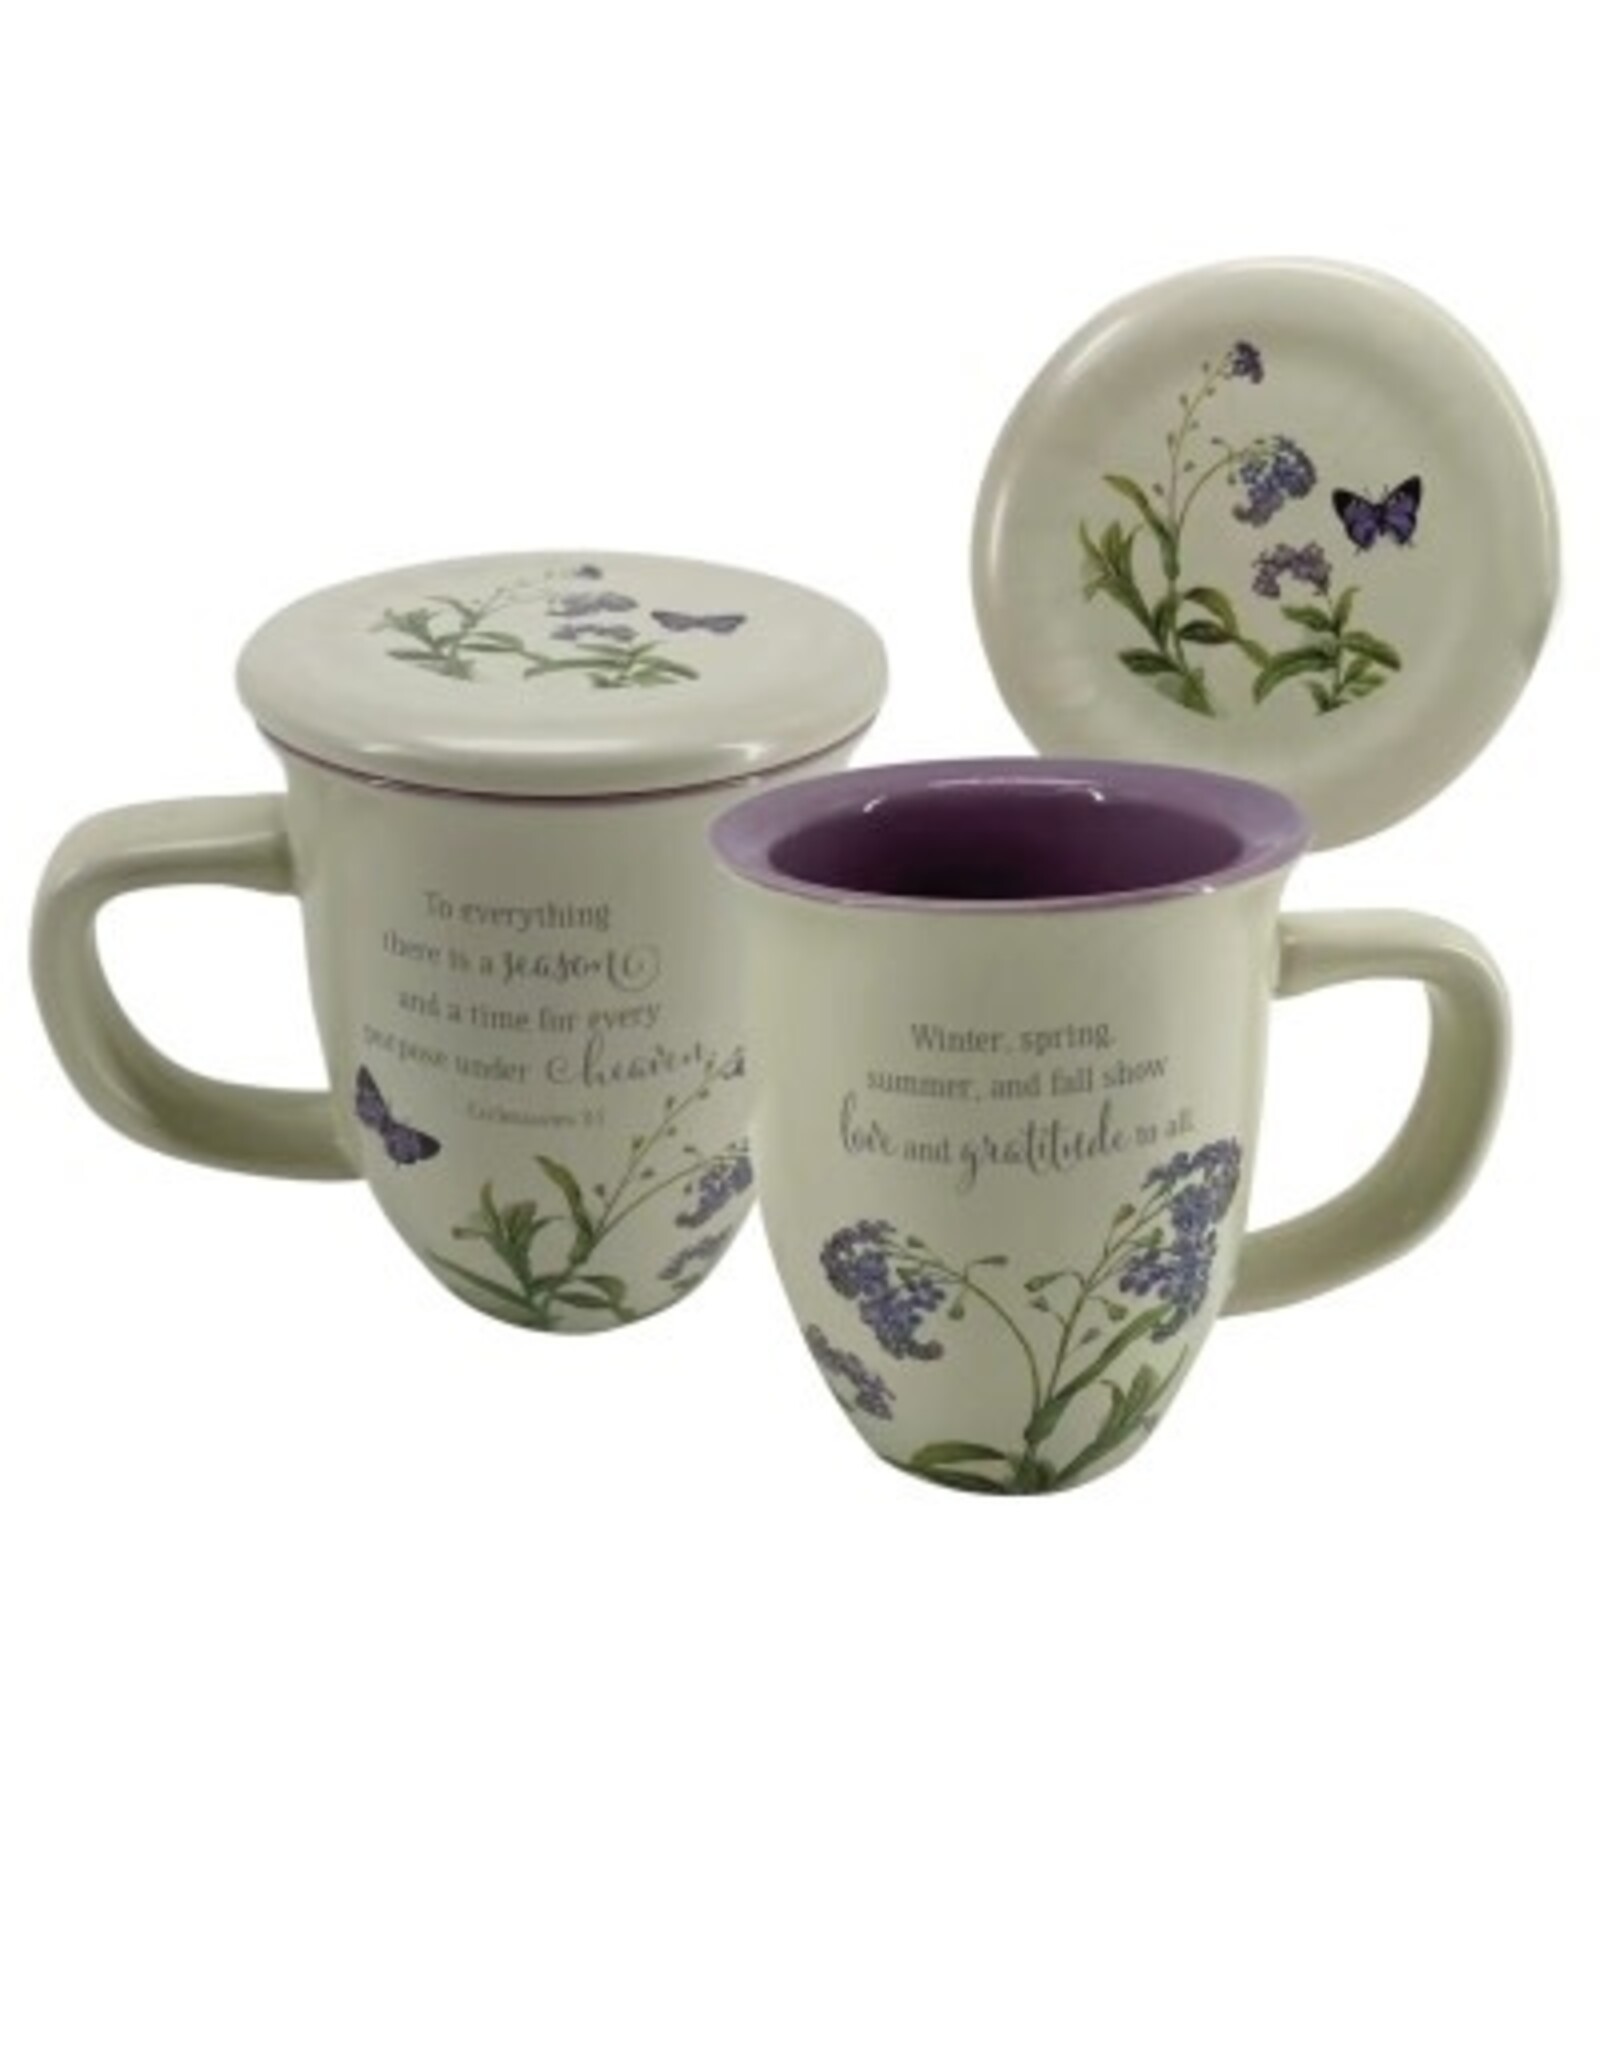 Abbey & CA Gift Mug - To Everything a Season (Purple Floral, Butterflies)